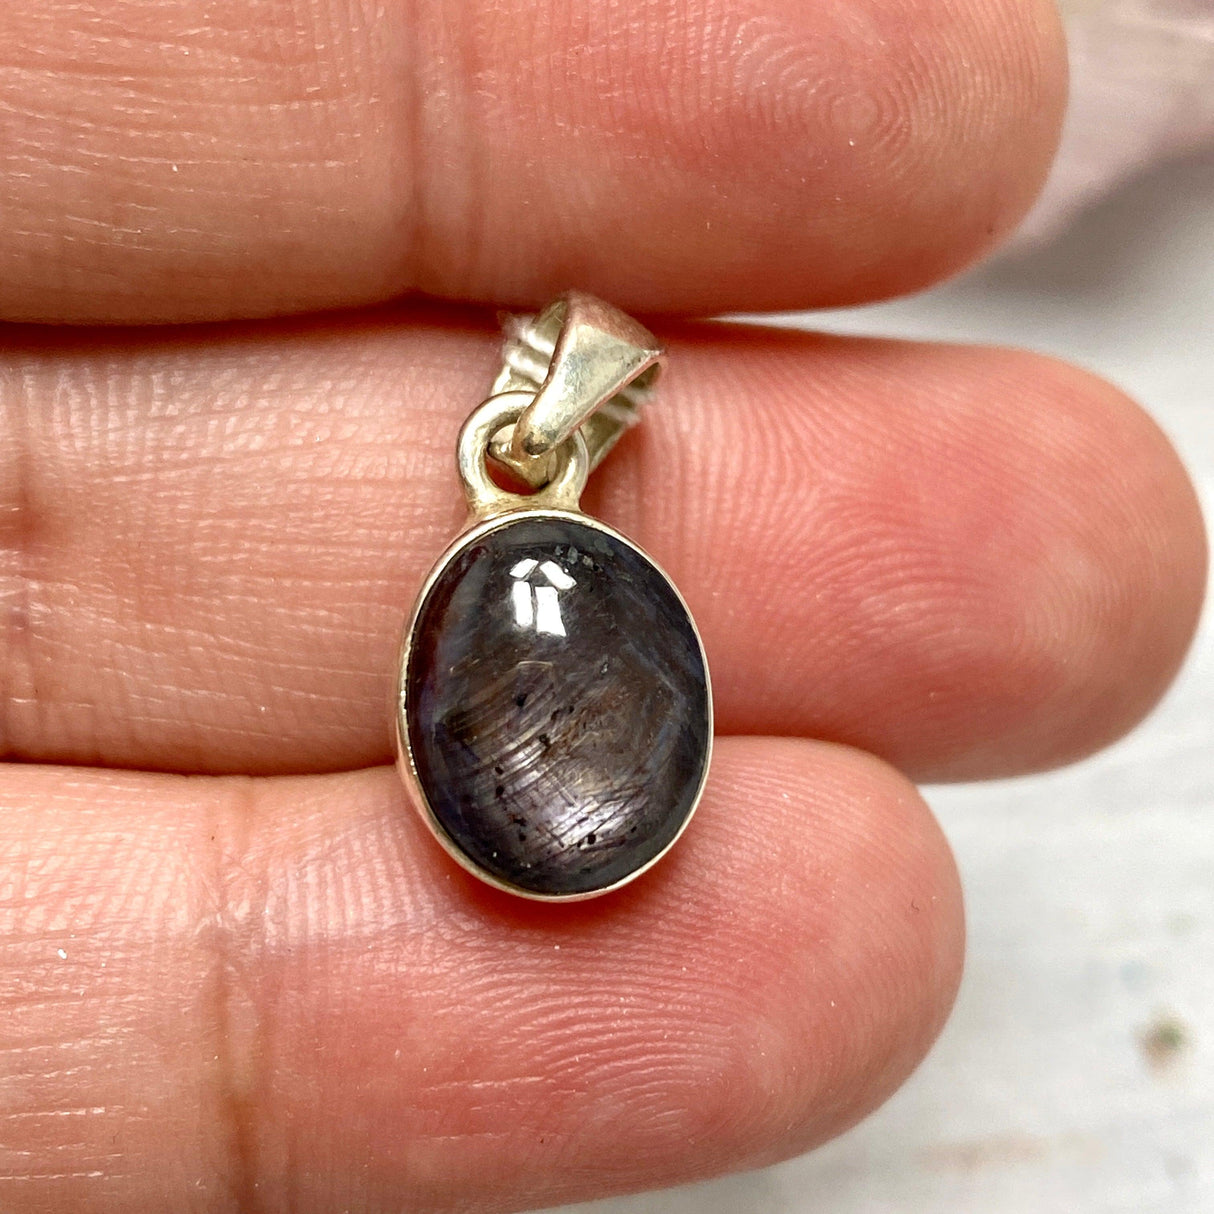 Star Ruby oval cabochon pendant - Nature's Magick